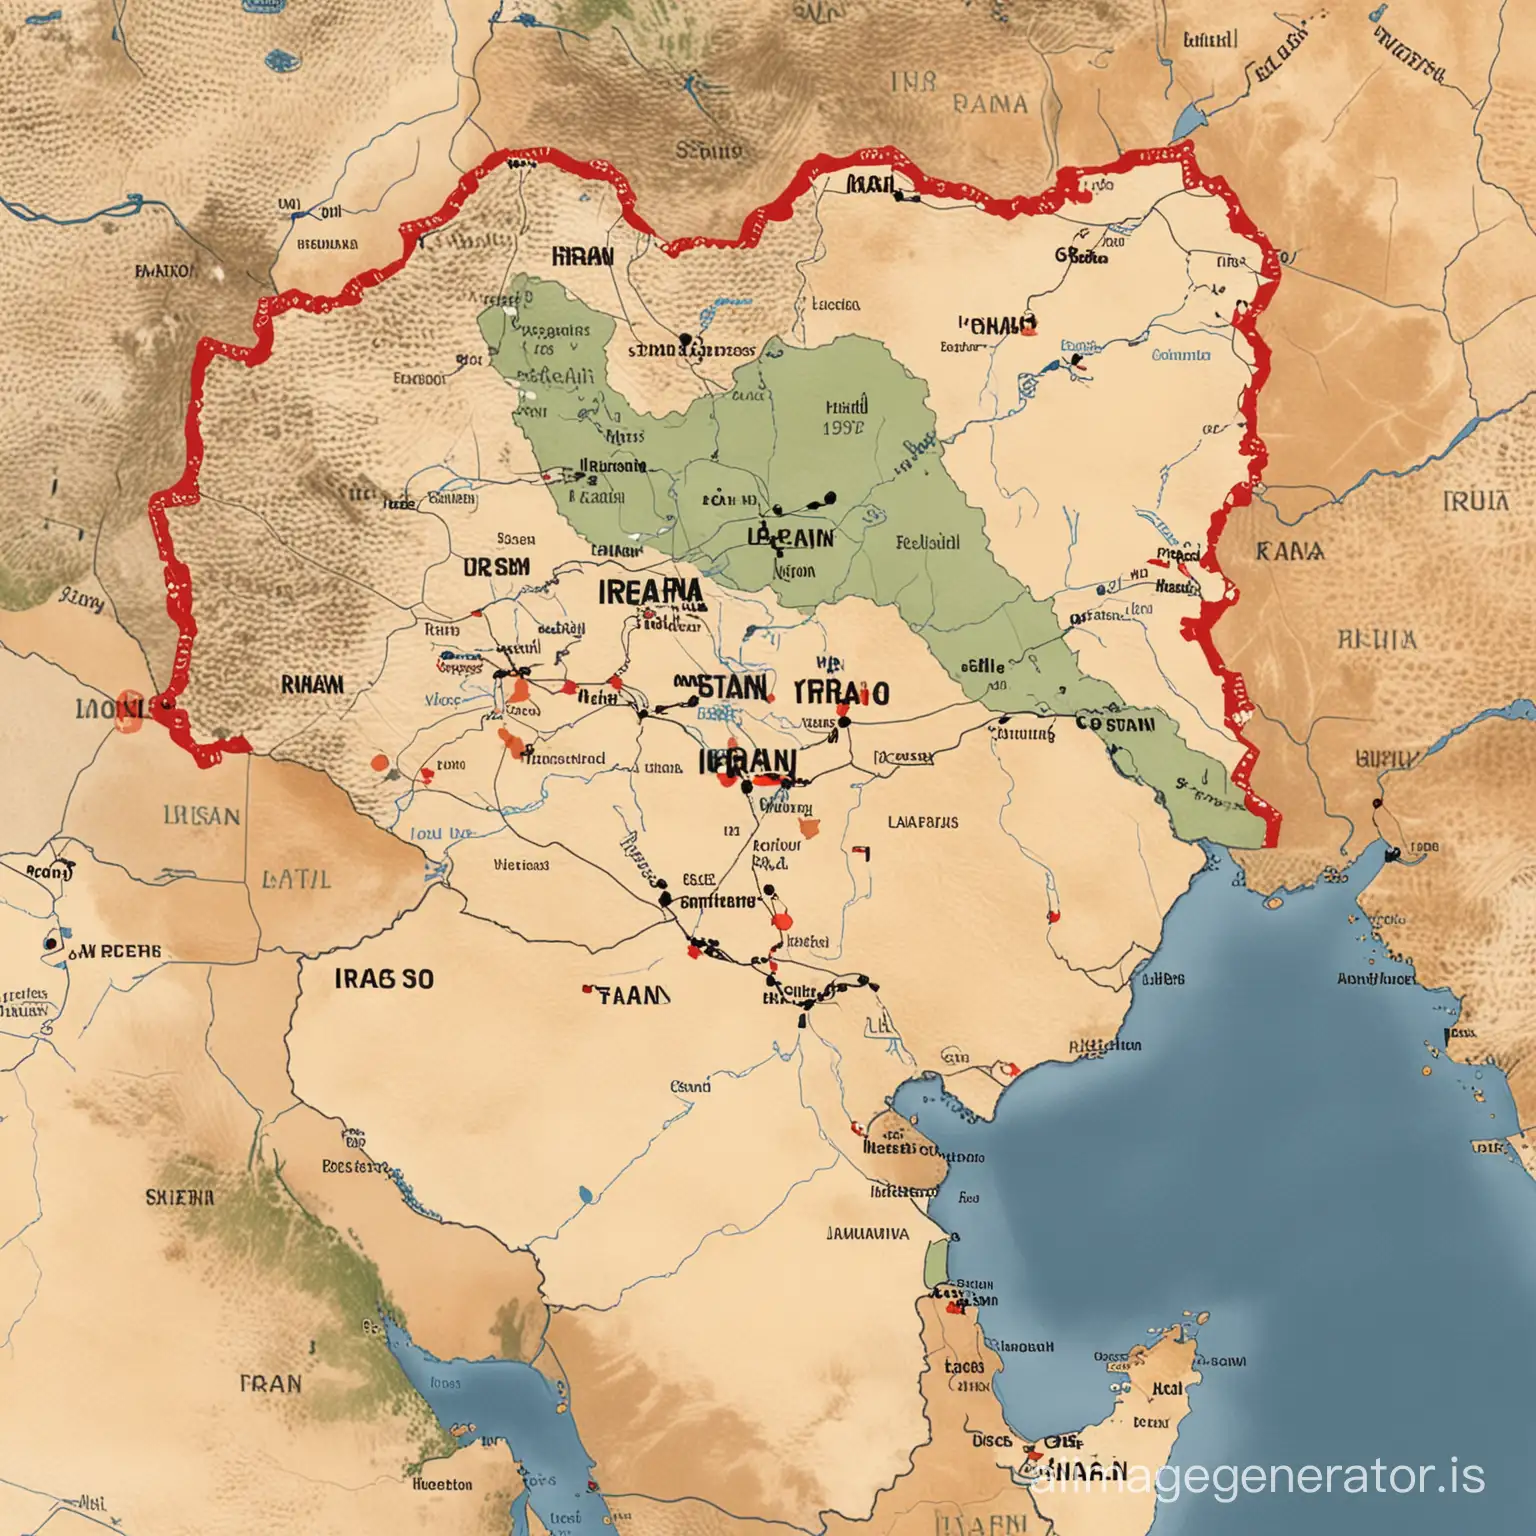 IranIraq-War-Conflict-Zones-Map-with-Markers